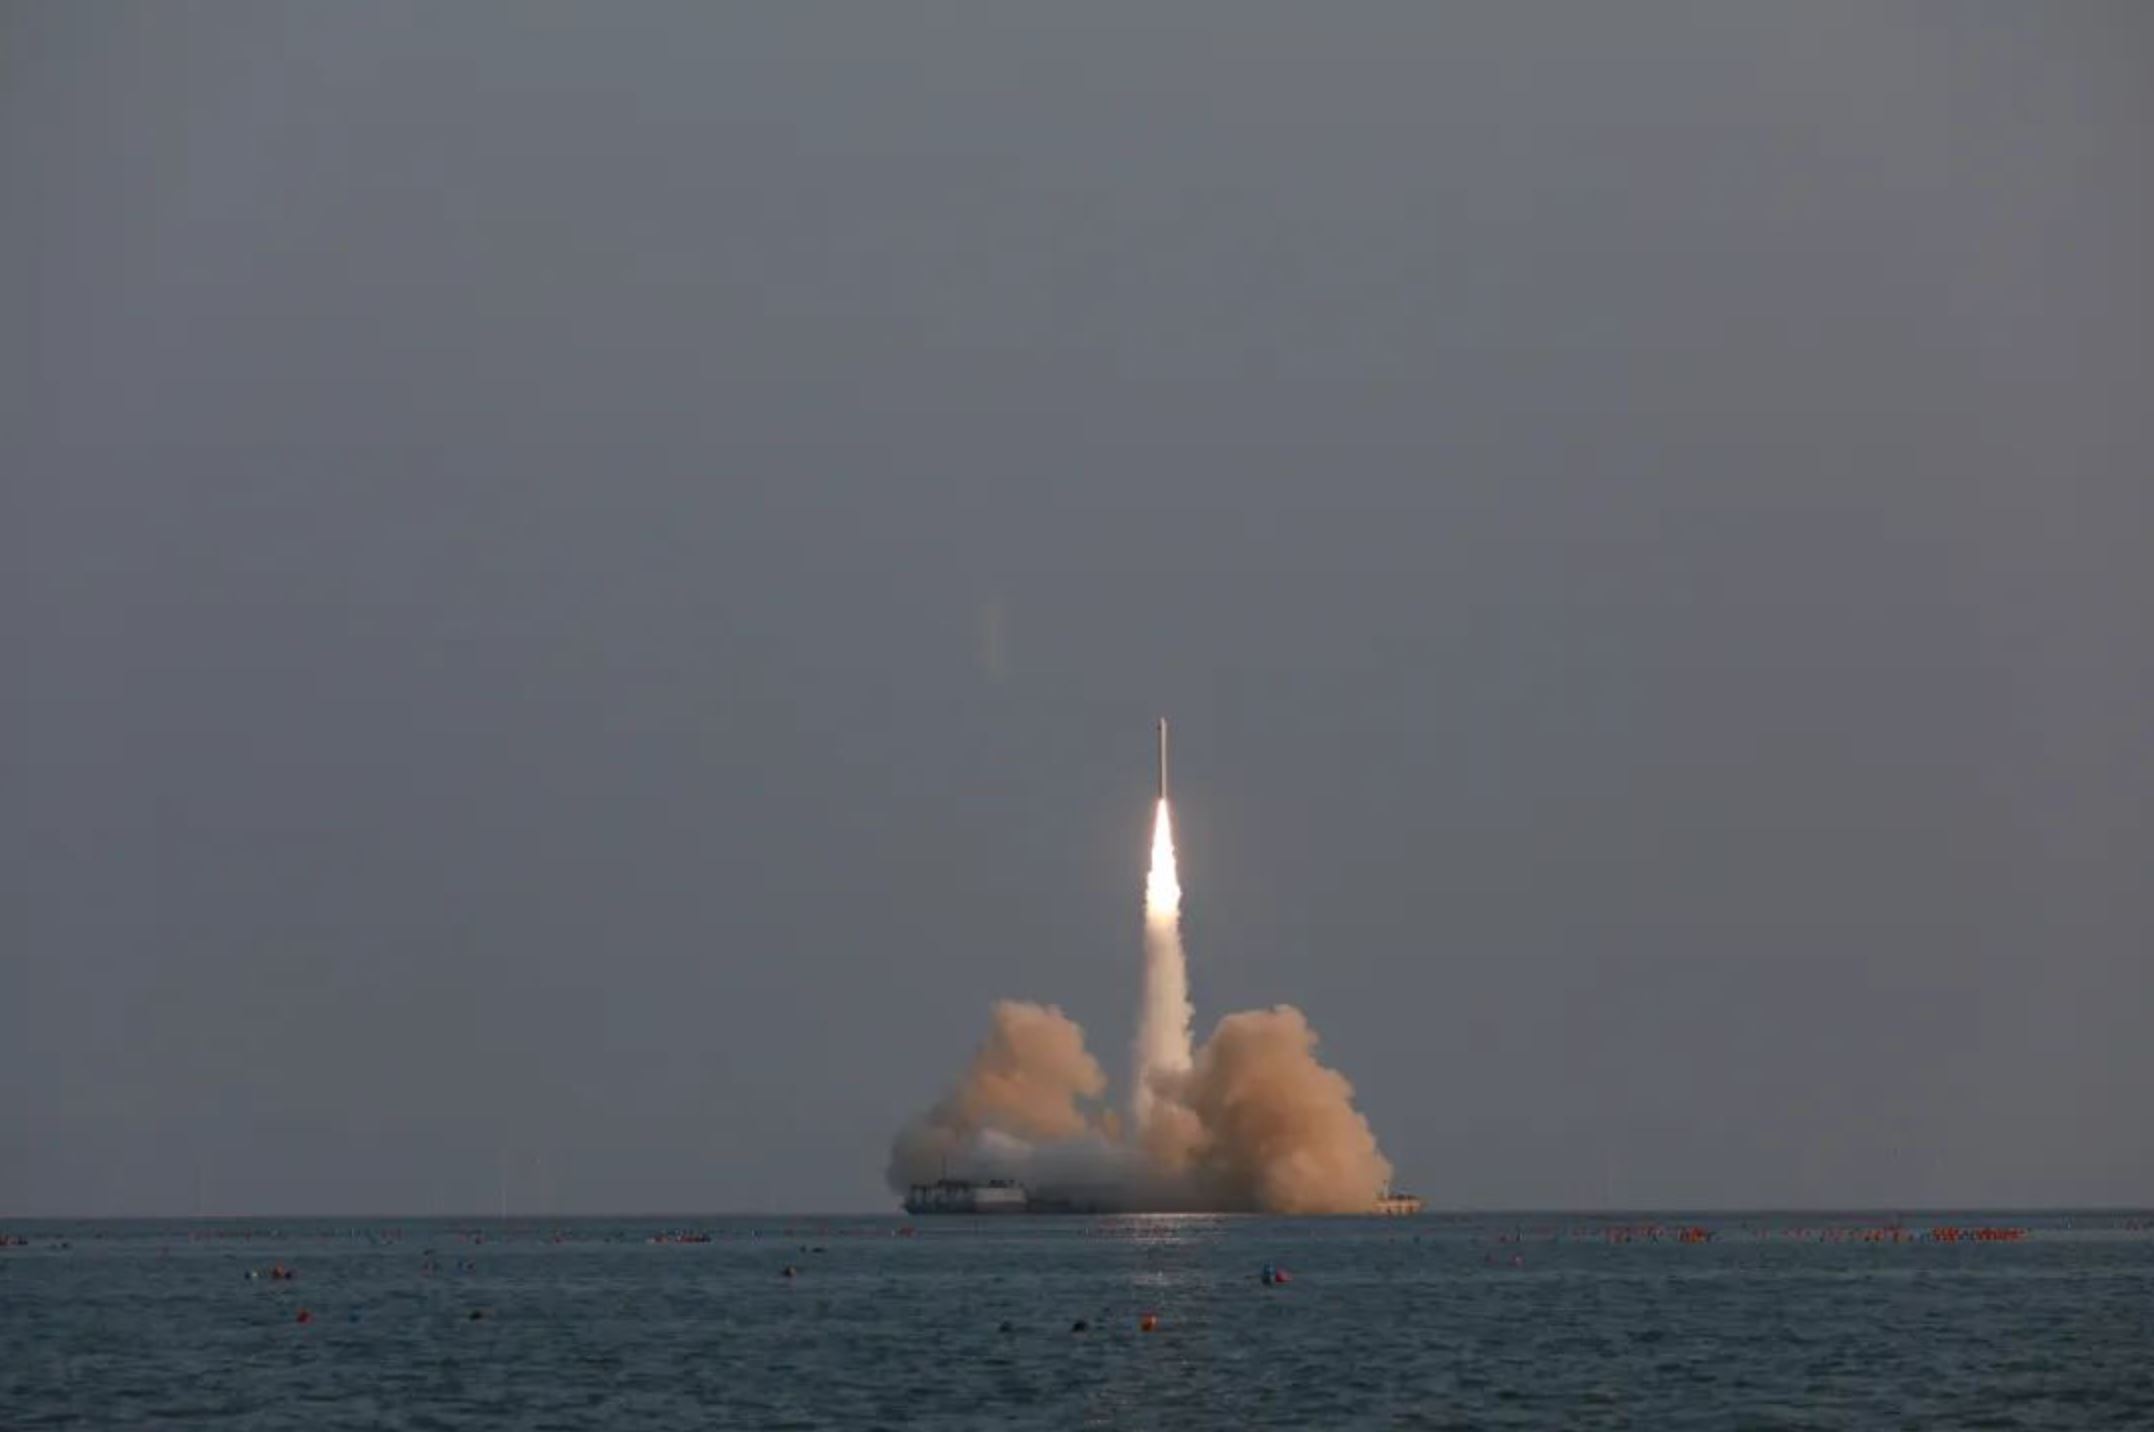 Chinese Ceres-1 rocket reaches orbit with first sea launch